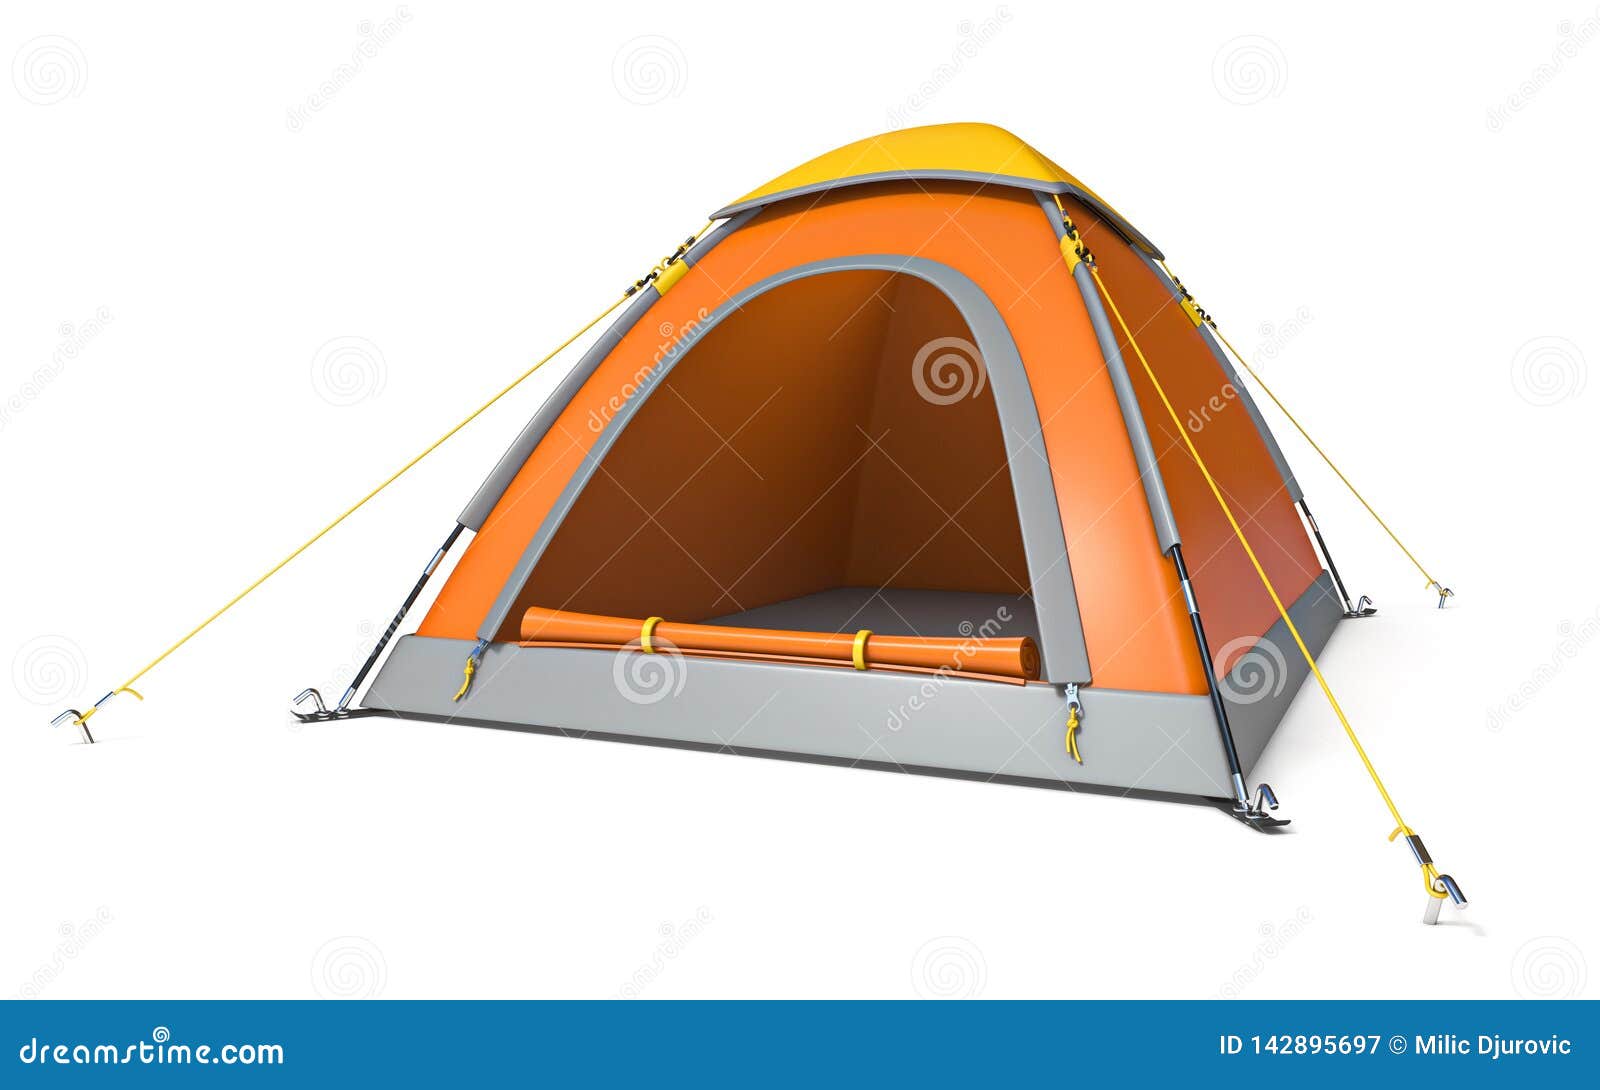 View Tents Camping On Image & Photo (Free Trial)